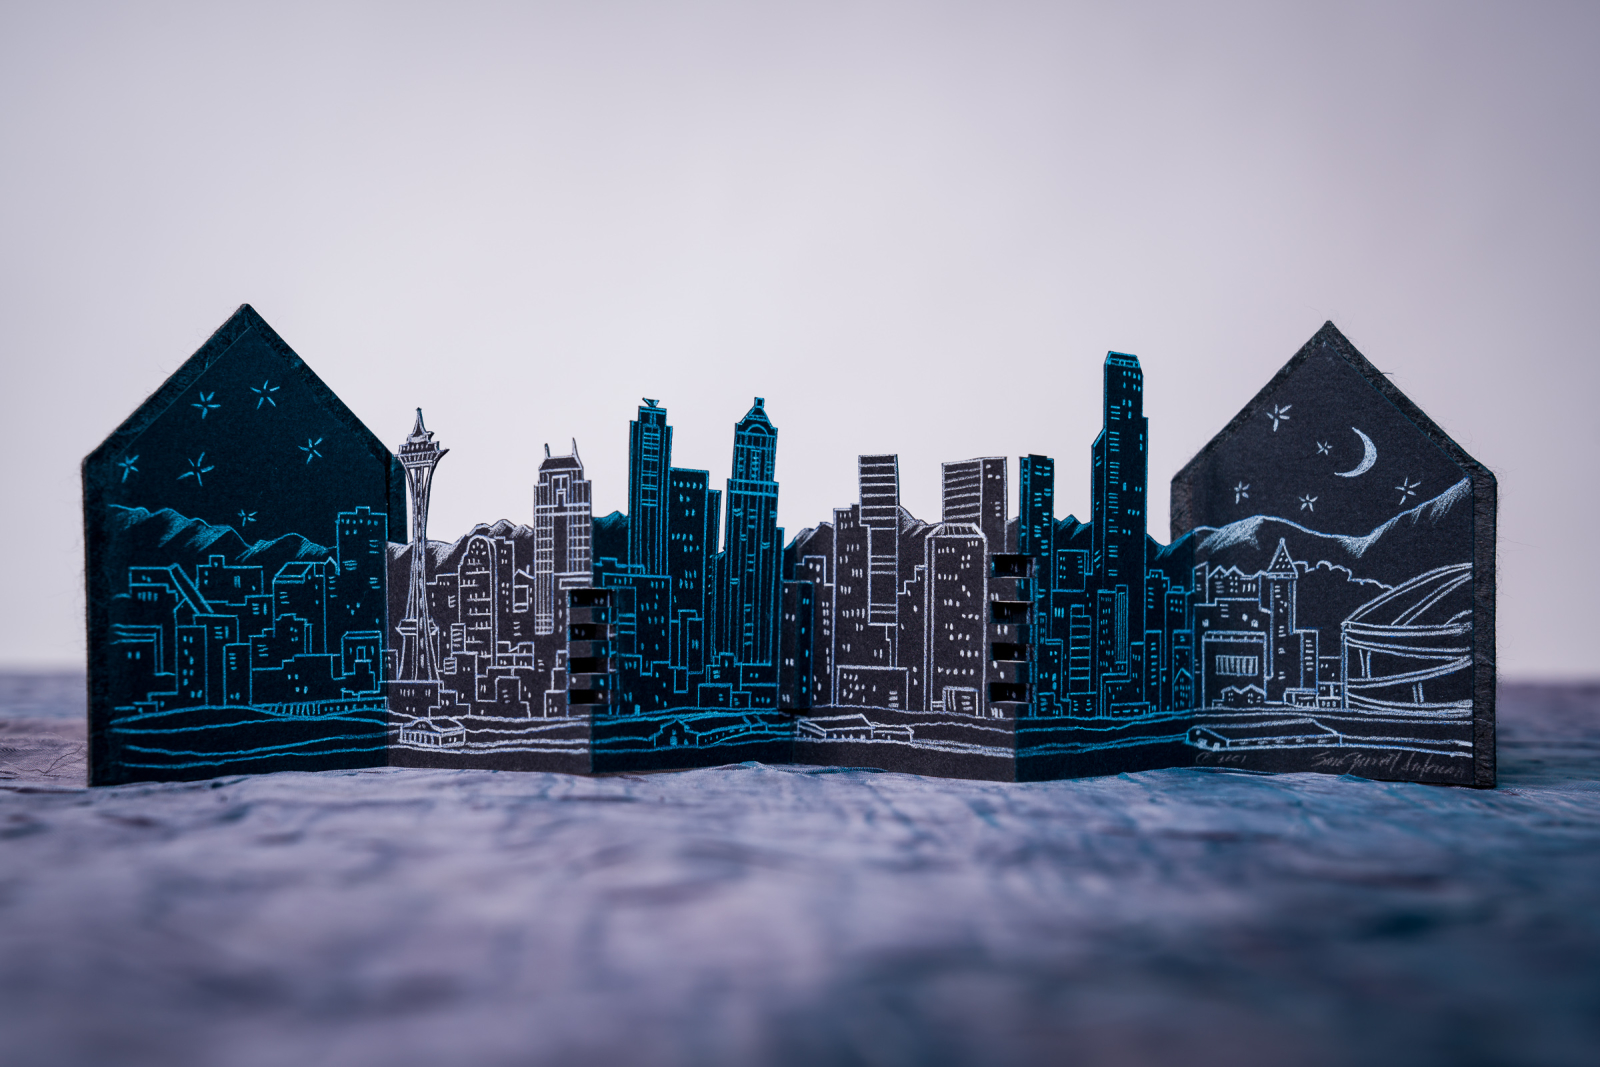 An image of Seattle Skyline by Sam Garriott Antonacci against a grey-white background opened in an accordian style. The pages have an alternating blue/white pattern and are cut to look like a city skyline.